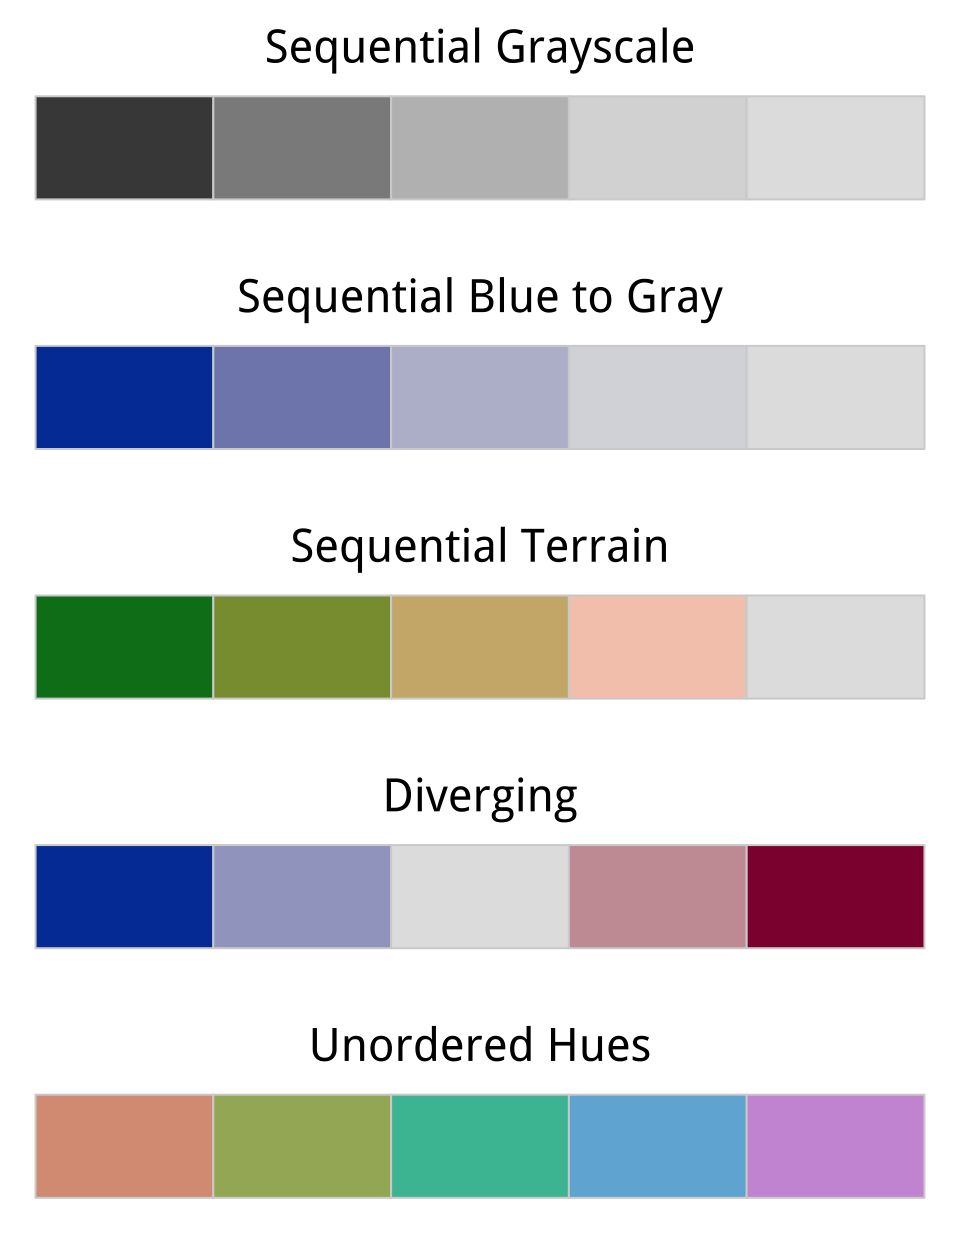 Five palettes generated from R's colorspace library. From top to bottom, the sequential grayscale palette varies only in luminance, or brightness. The sequential blue palette varies in both luminance and chrominance (or intensity). The third sequential palette varies in luminance, chrominance, and hue. The fourth palette is diverging, with a neutral midpoint. The fifth features balanced hues, suitable for unordered categories.